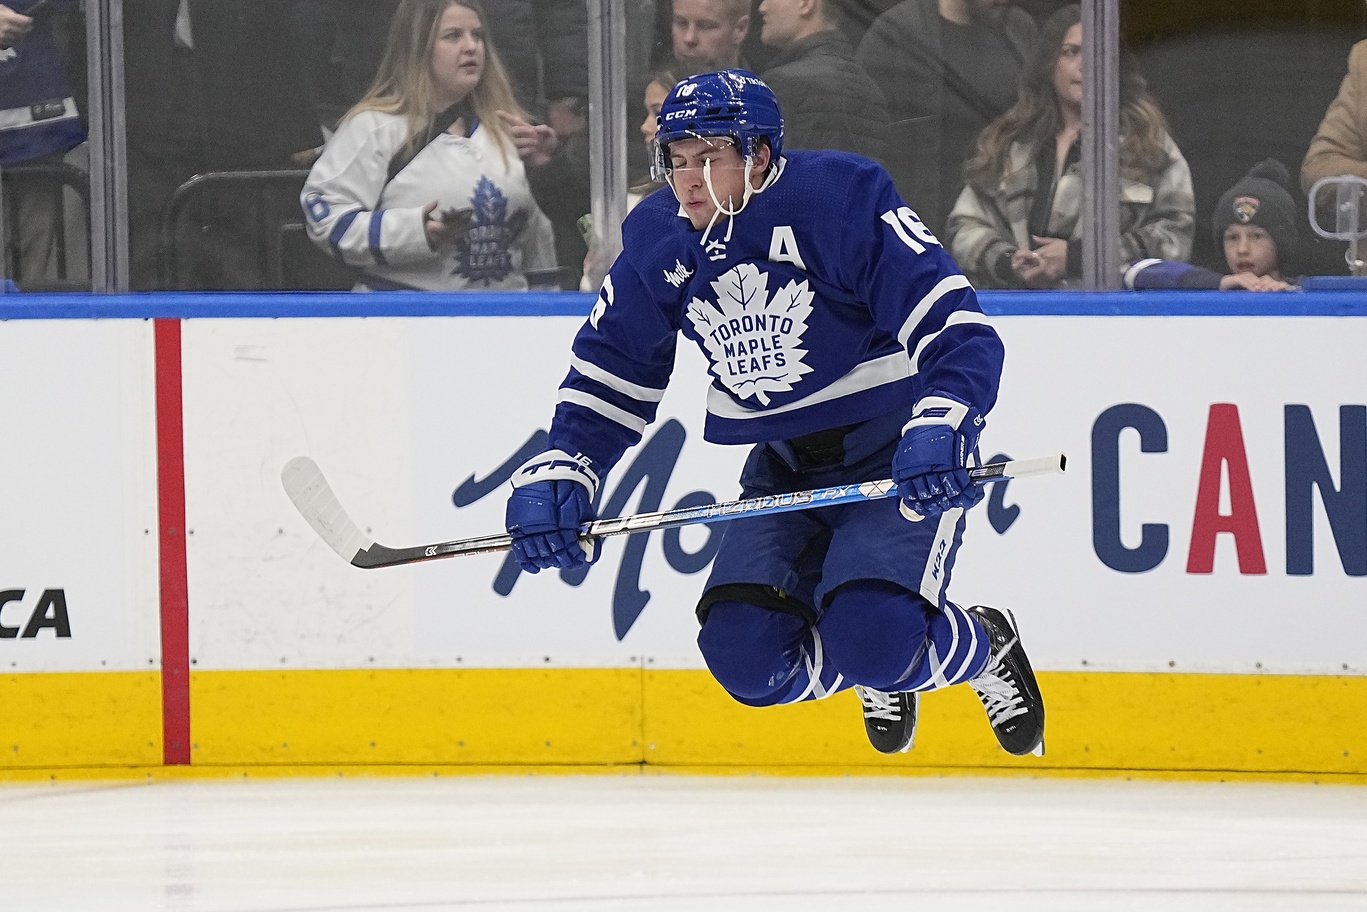 Carolina Hurricanes at Toronto Maple Leafs: Game Preview & Storm